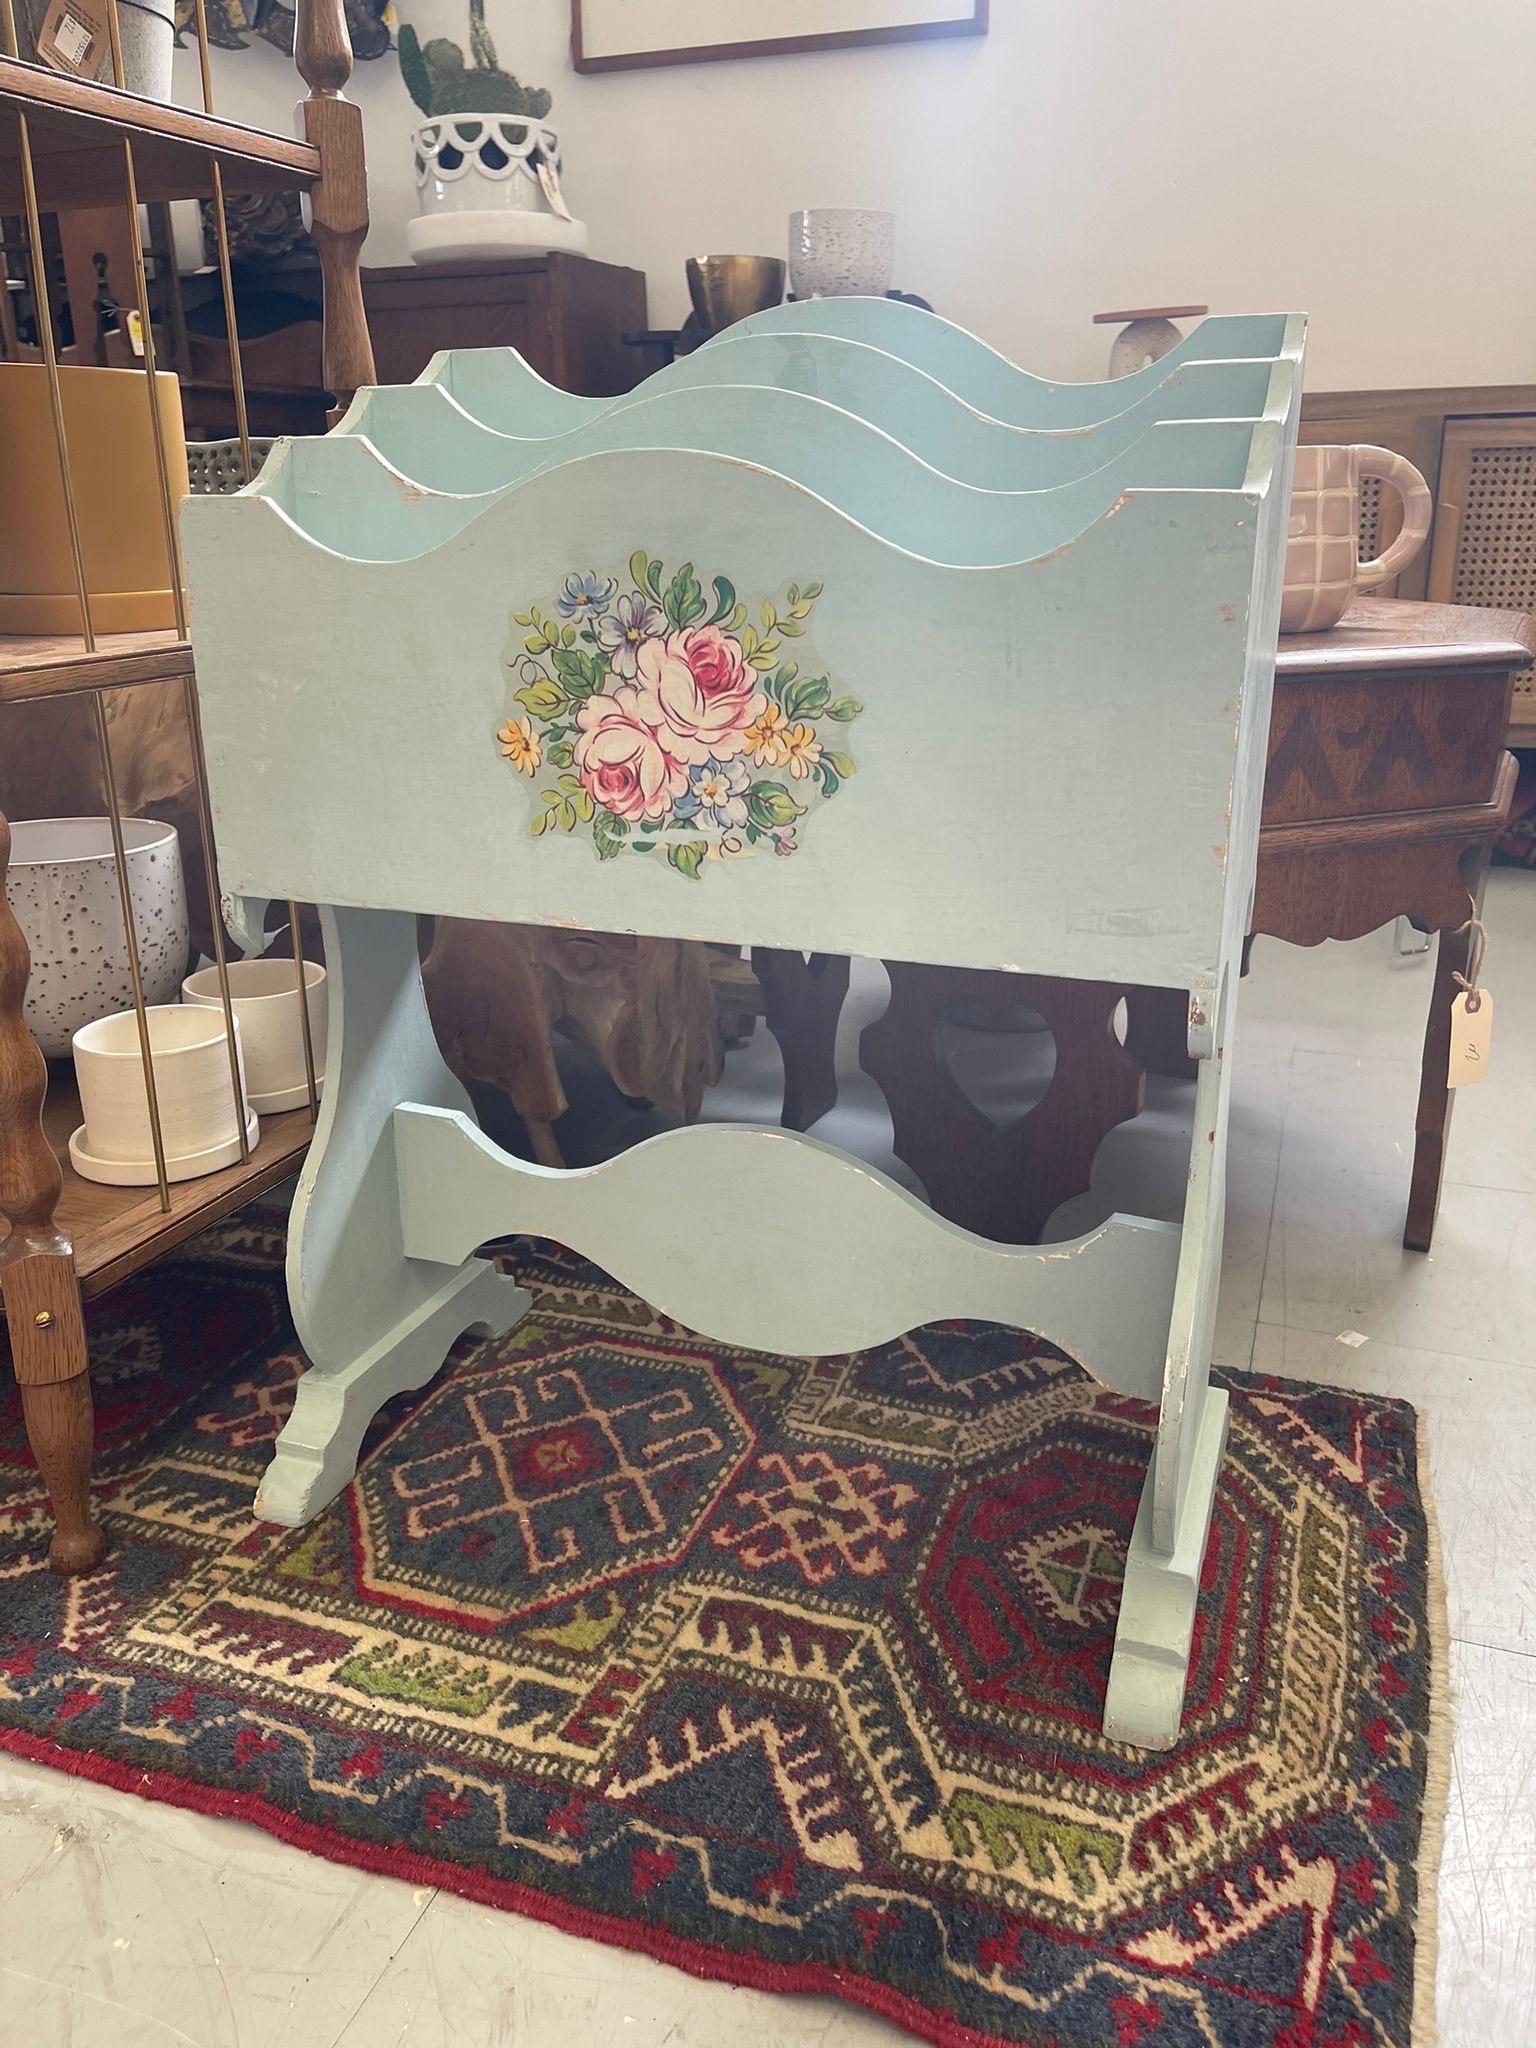 This Magazine rack has sculpted wood edges and a bright floral motif on the front. The Rack is split into three sections. Vintage Condition Consistent with Age as Pictured.

Dimensions. 20 W ; 10 D ; 27 H